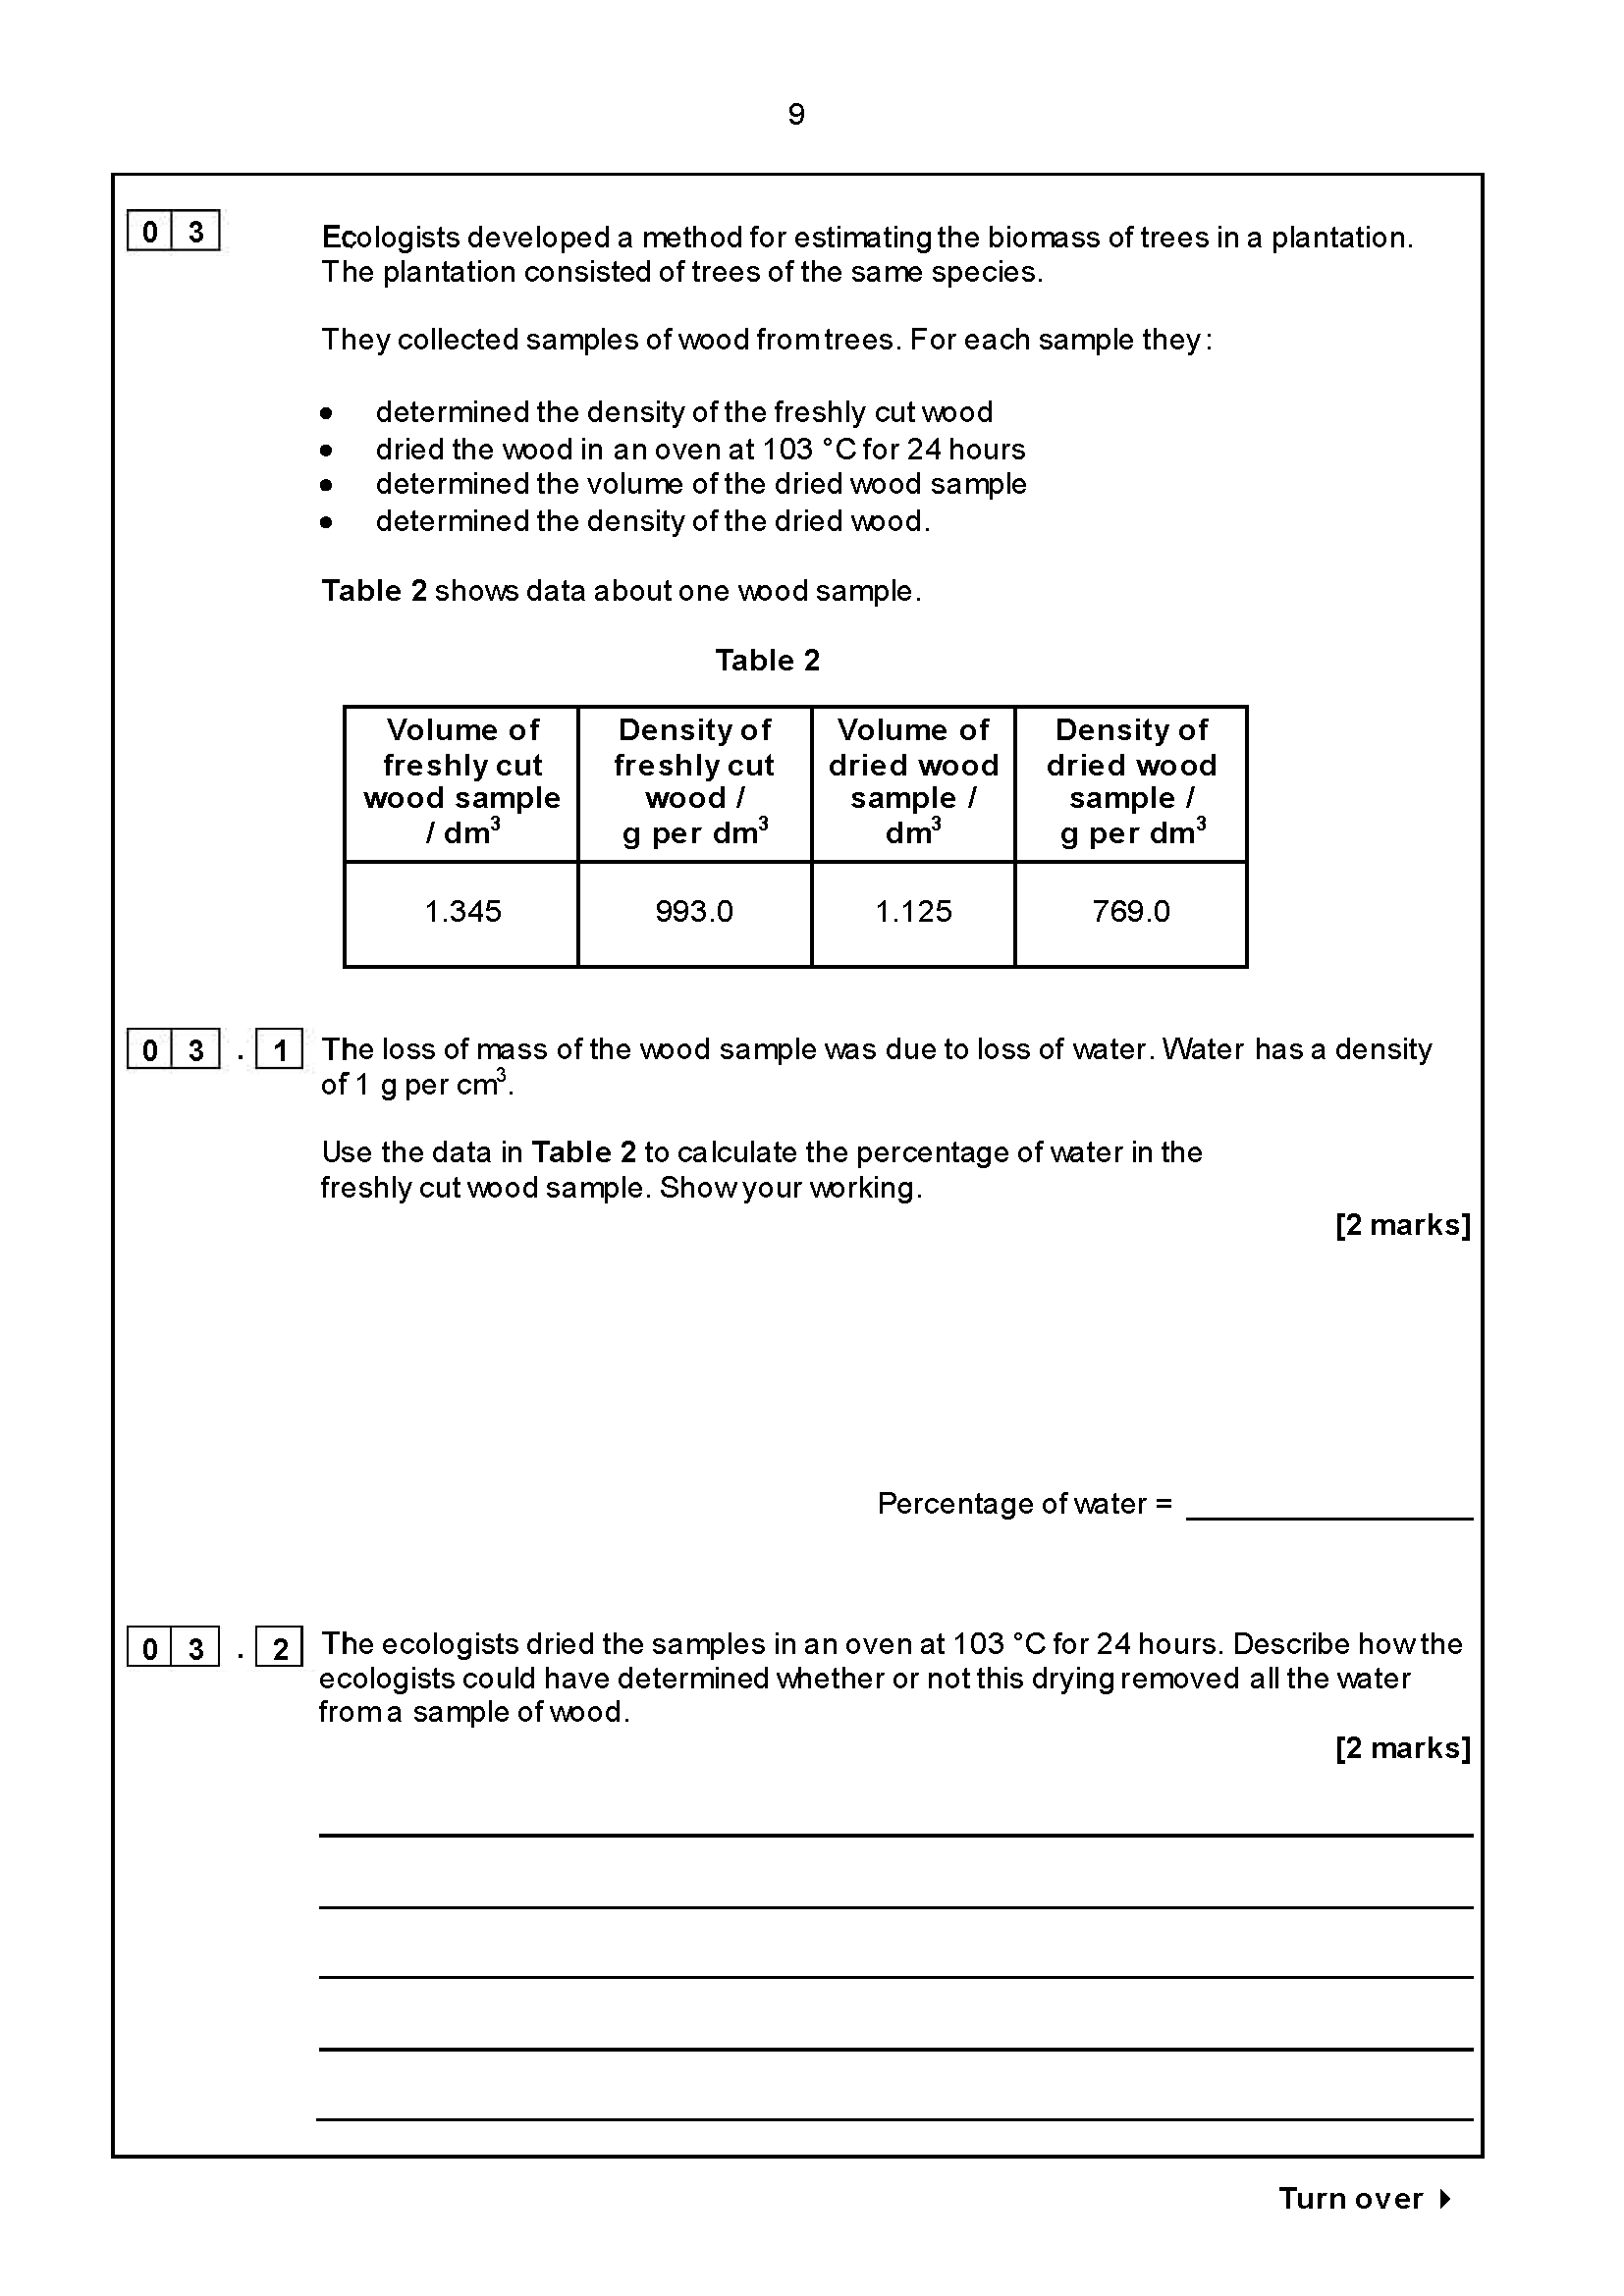 calculationquestionsAQA_Page_06.png